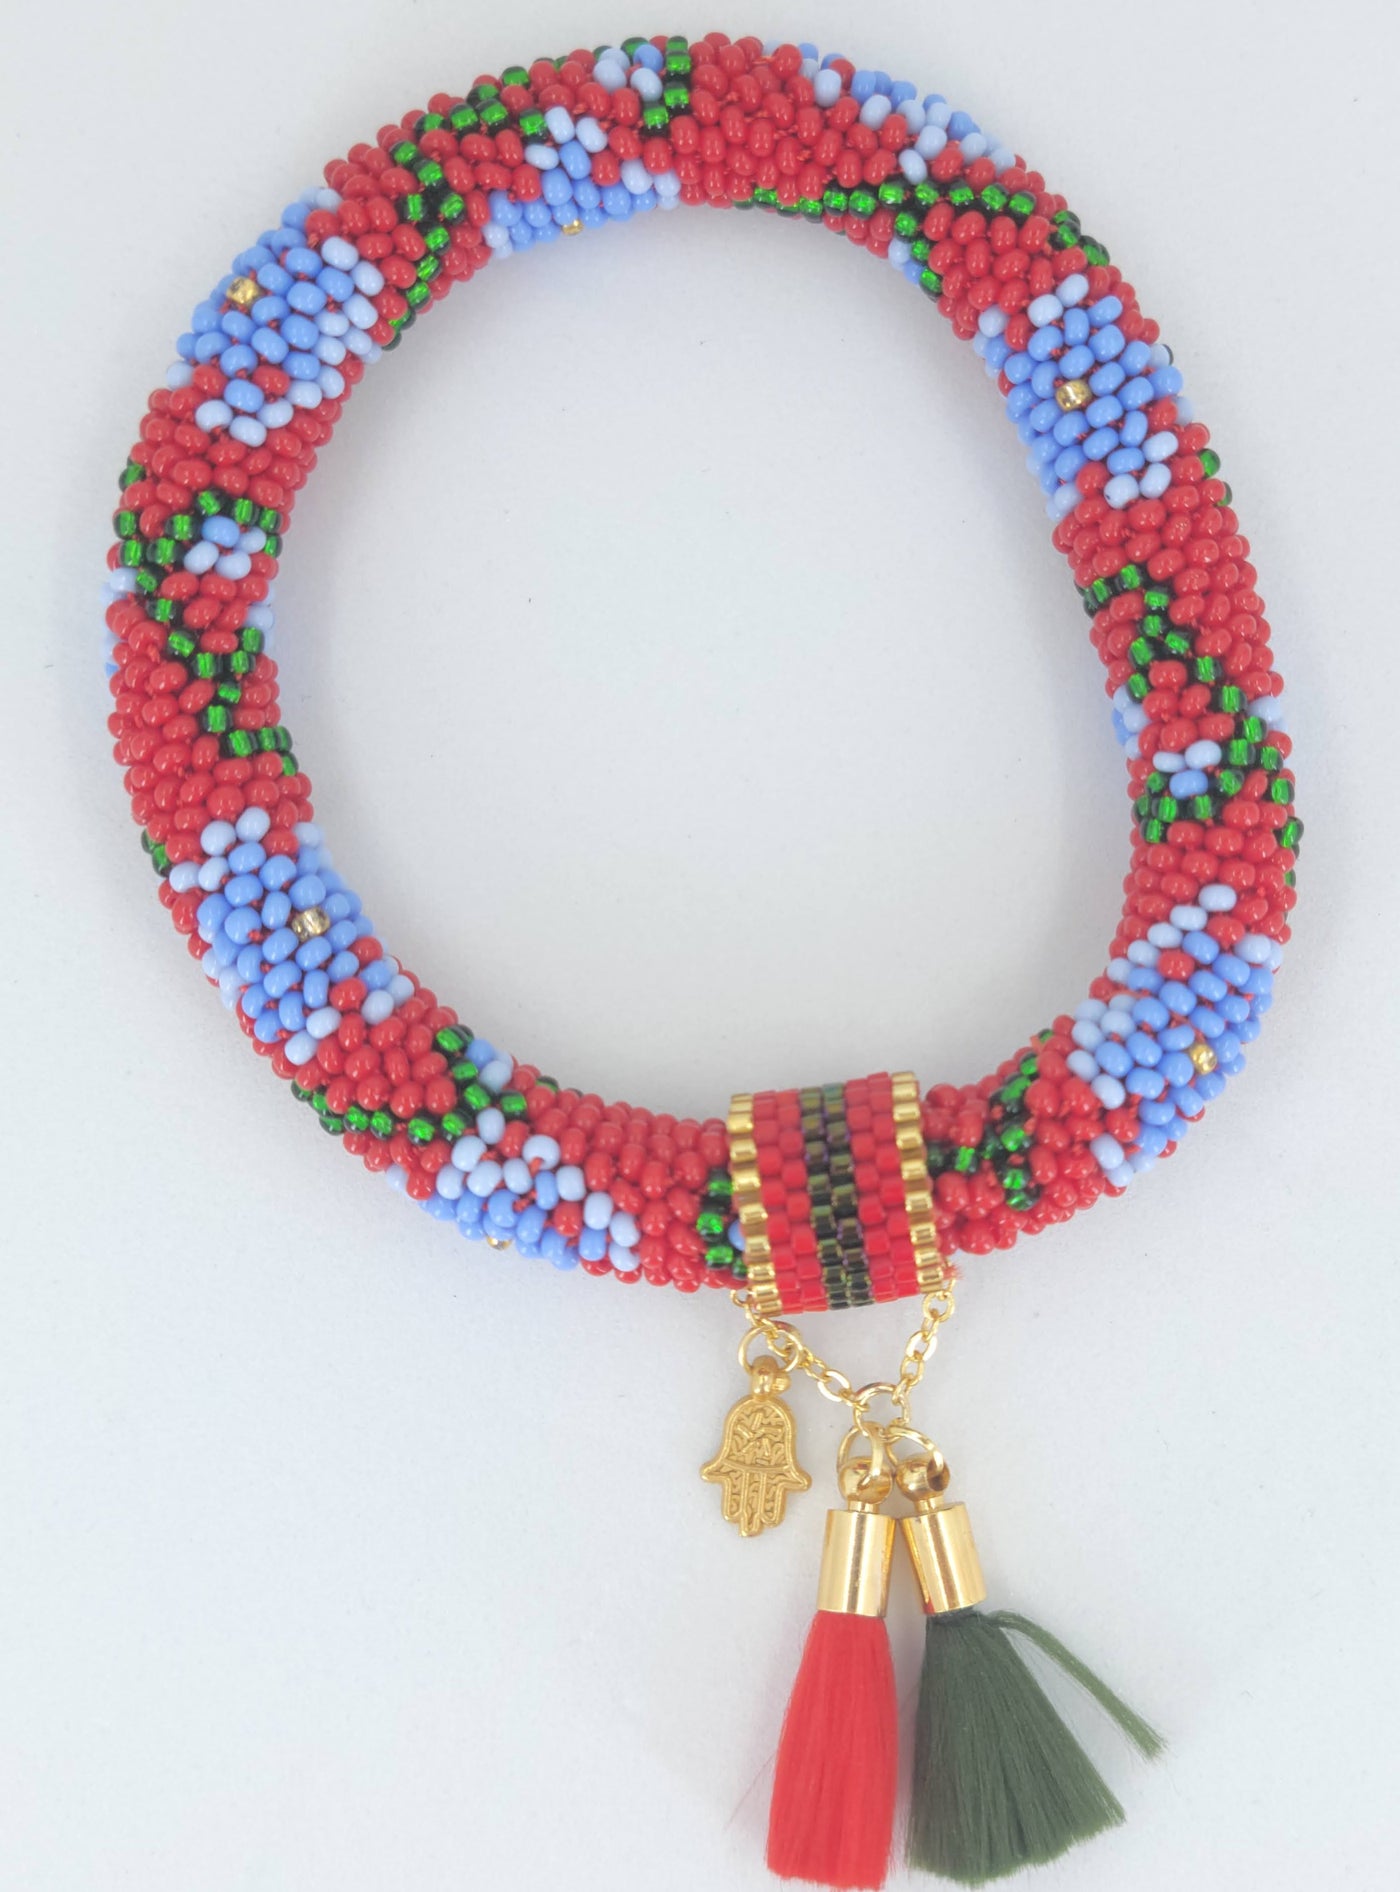 crocheted beaded bracelet in floral with tassels and hamsa charm